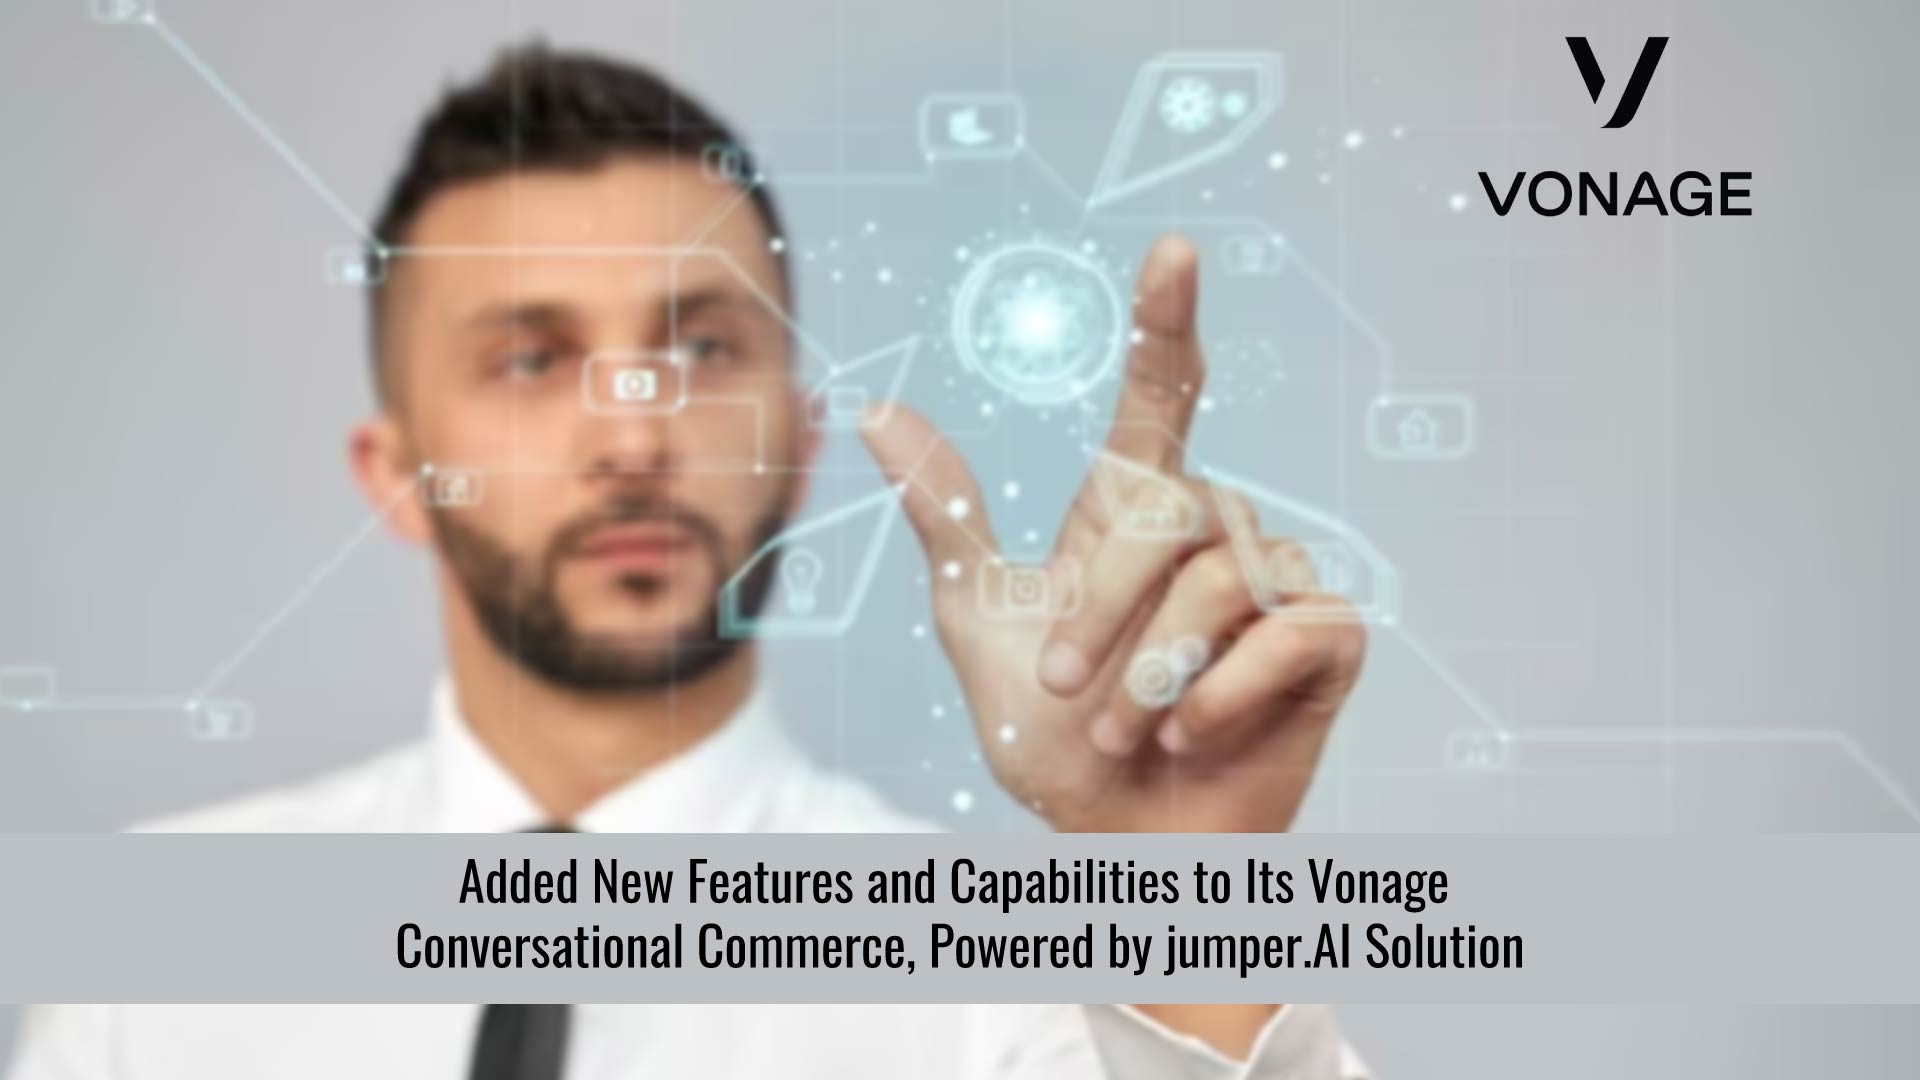 Businesses to Deliver Omnichannel Customer Experiences with New Additions to Vonage Conversational Commerce, powered by Jumper.ai